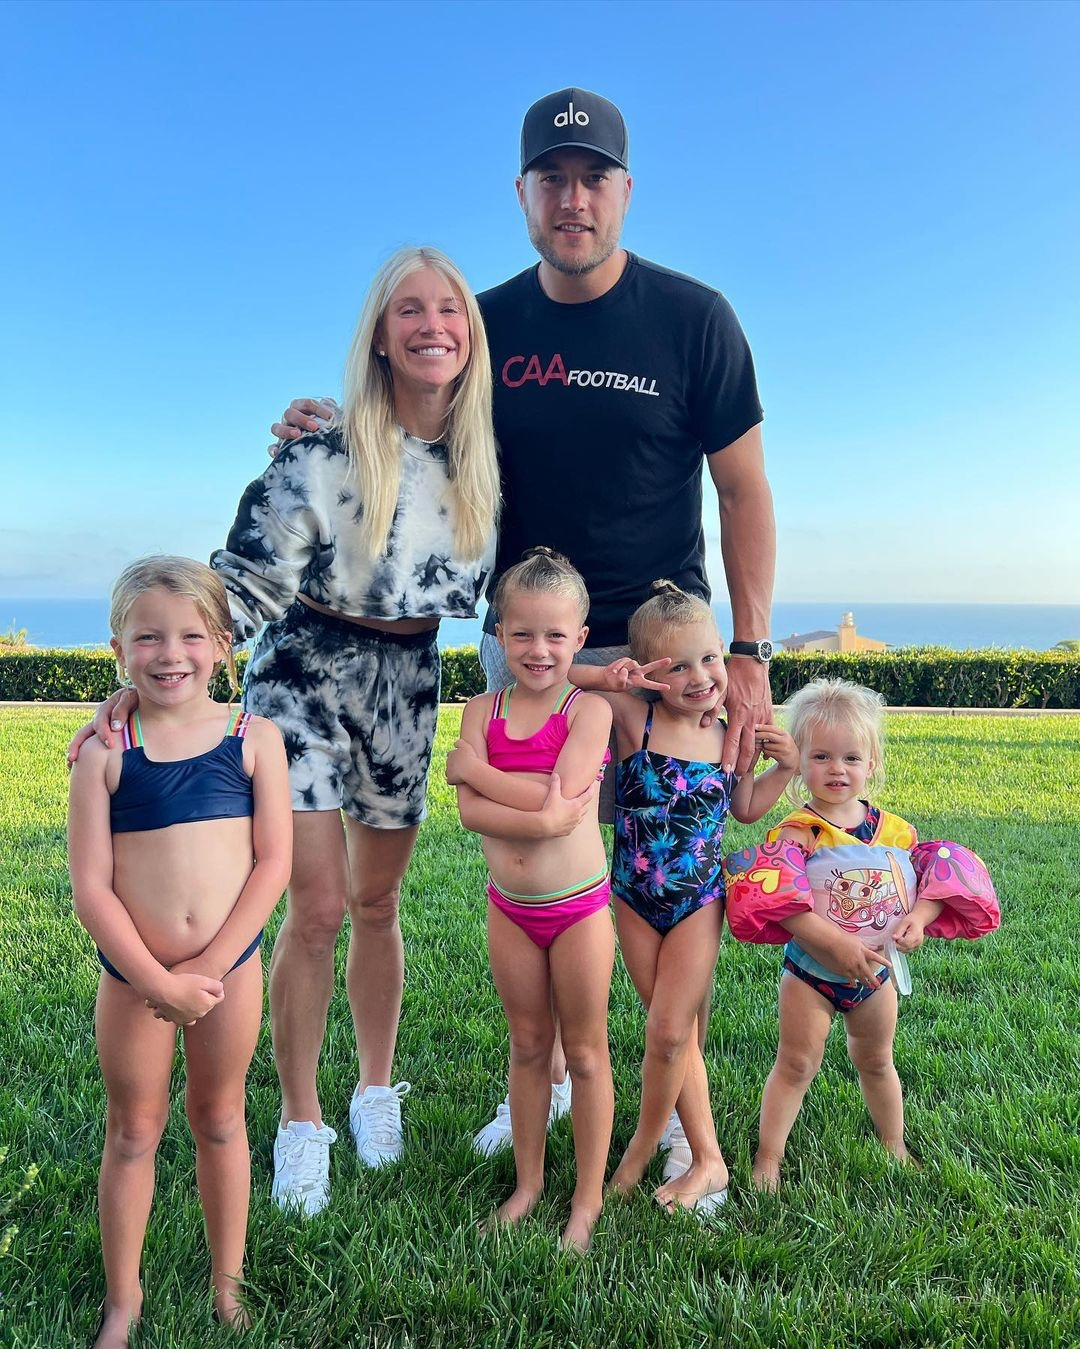 Matthew Stafford's Wife Kelly Stafford Reacts to 'Shaming' She